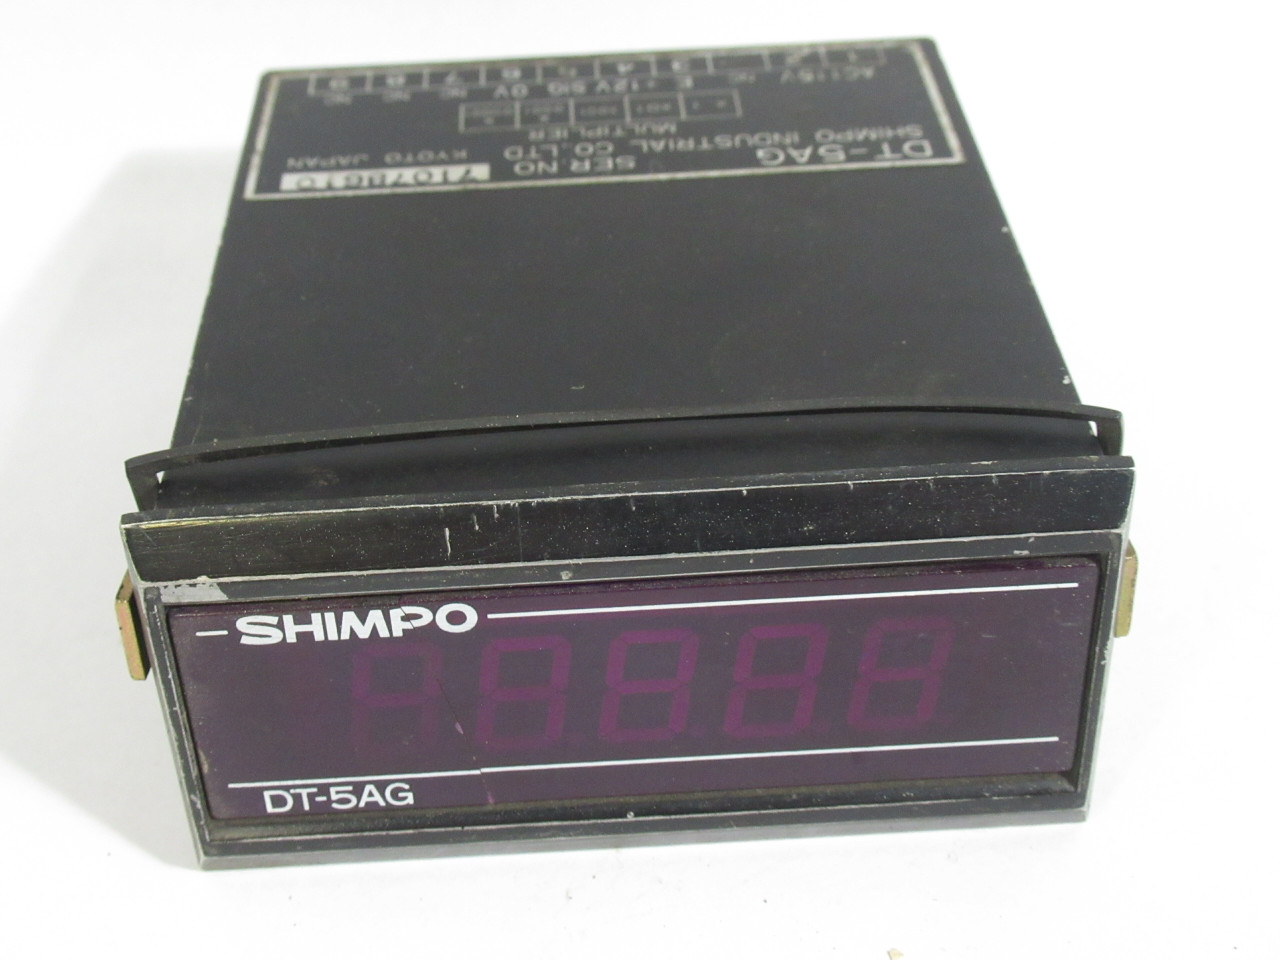 Shimpo DT-5AG Panel Mount Digital Tachometer 115VAC *Cracked Screen* USED